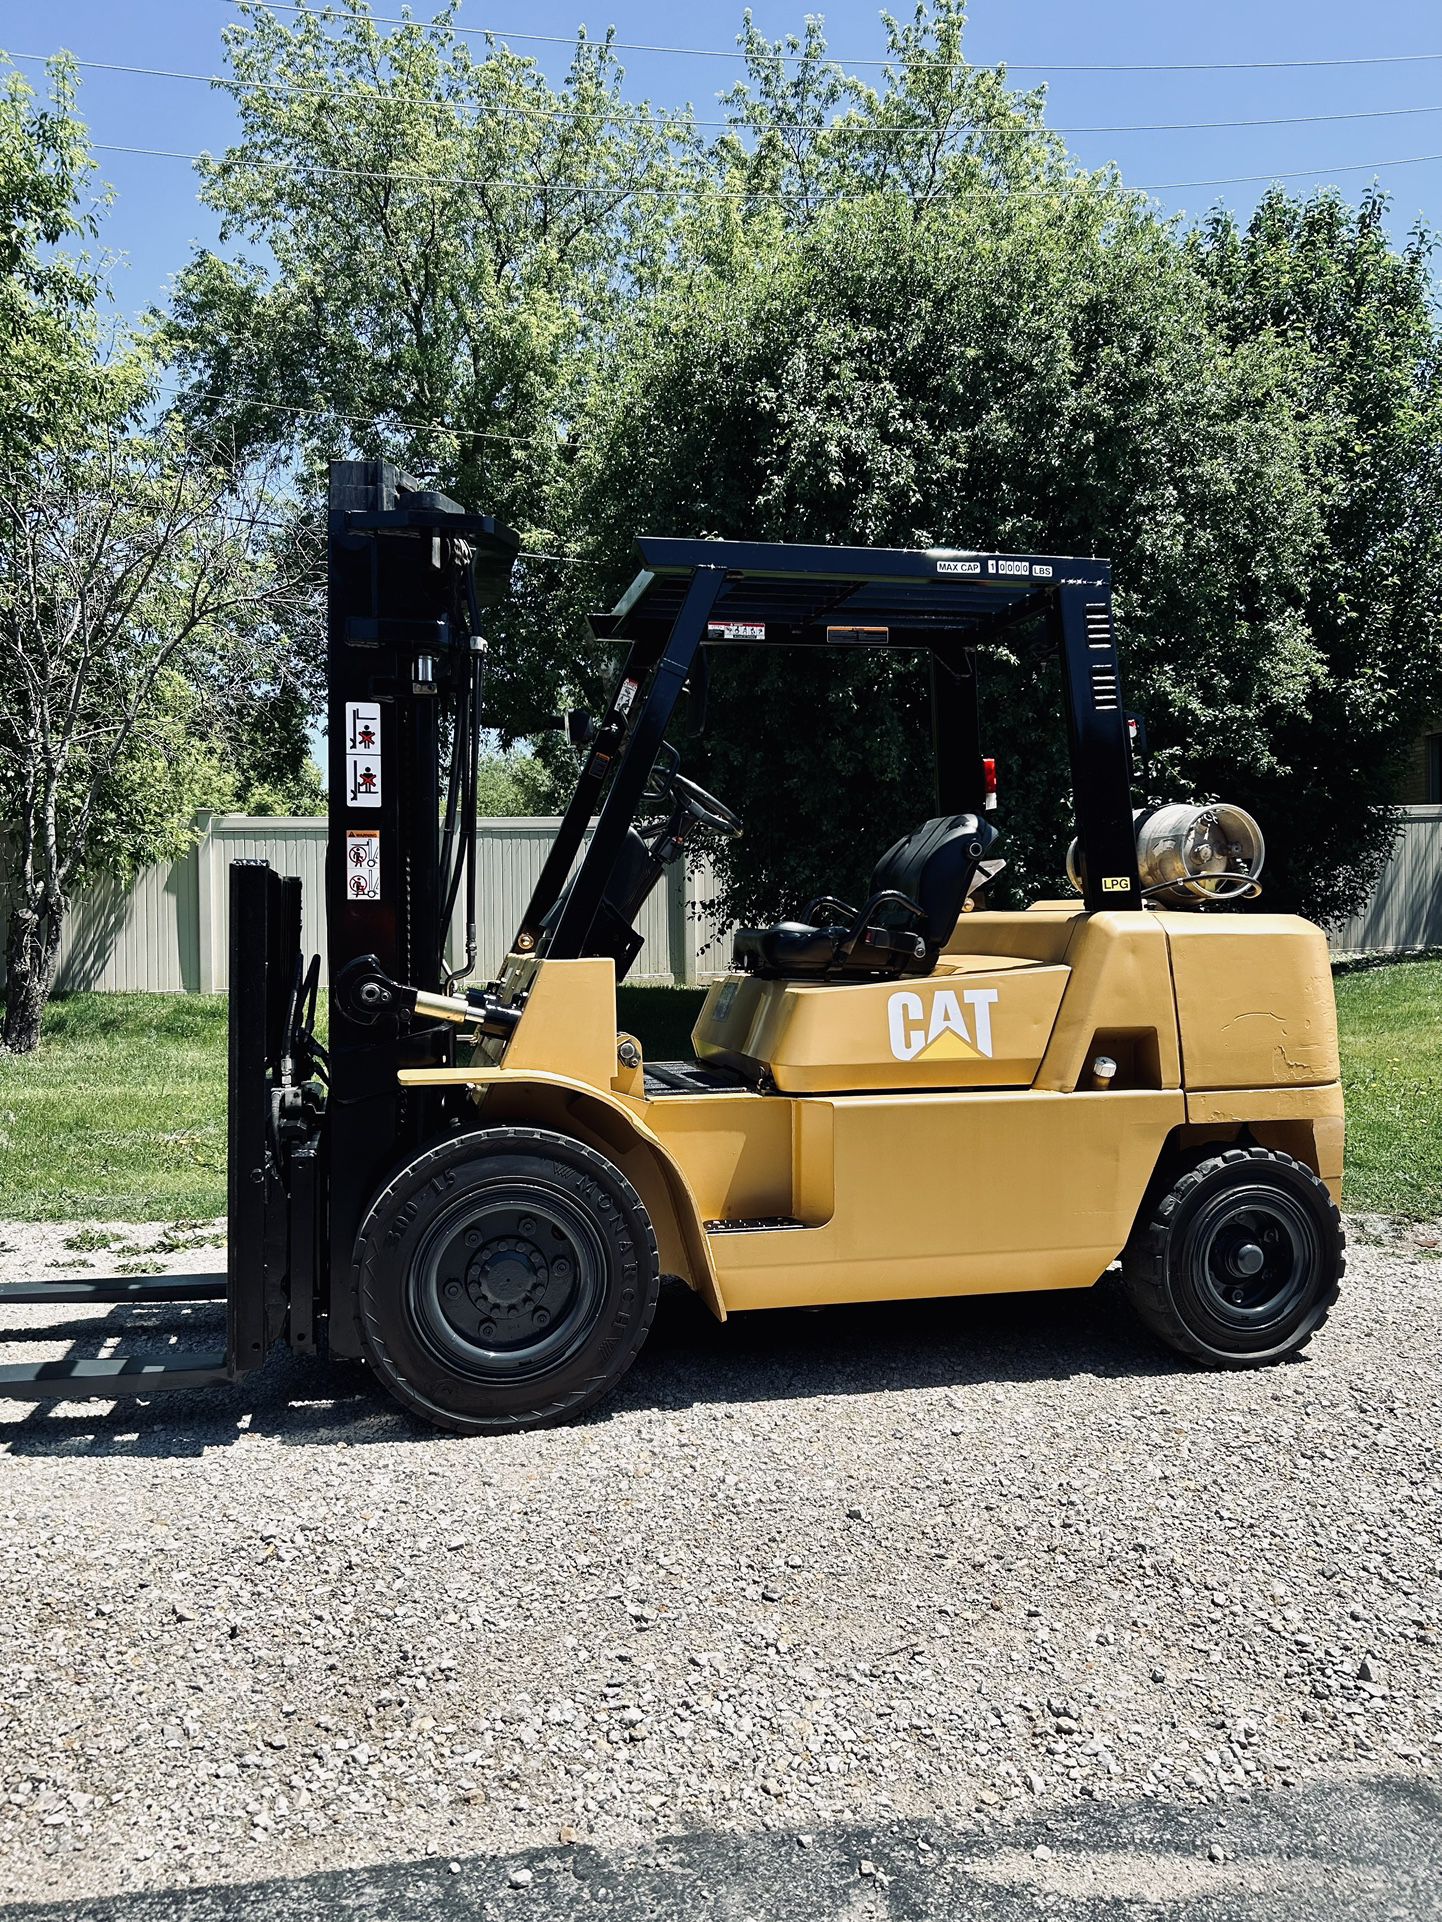 2016 CAT FORKLIFT CAPACITY 10000 Lb. 4 Hydraulic Lines In Active! Side Shift. Forks Adjust Automatically. Triple Mast. ONLY 6800 Hours. Propane. Ready